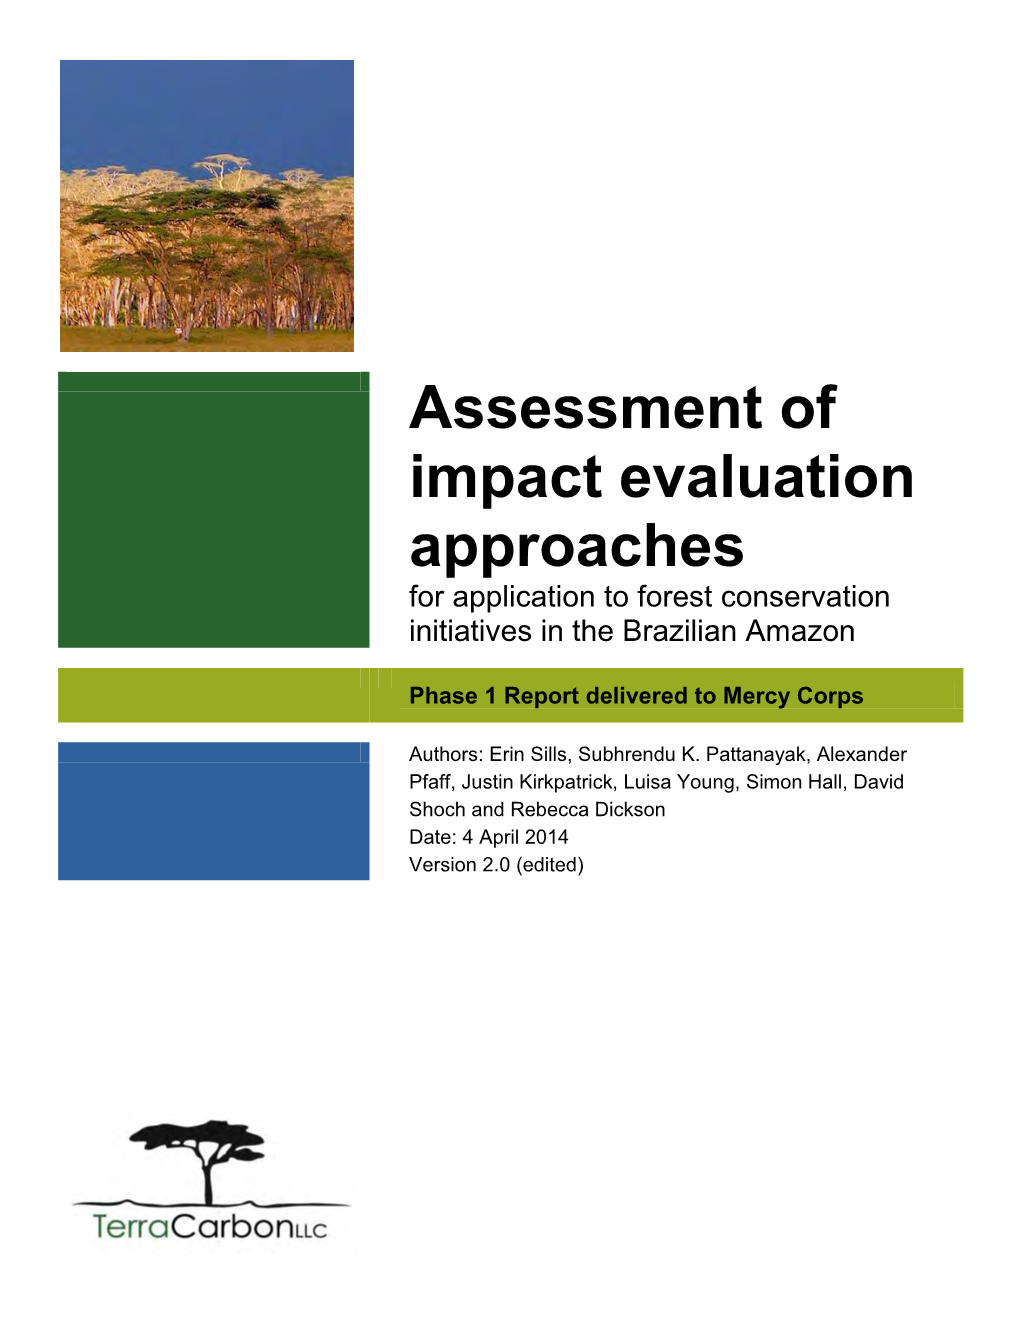 Assessment of Impact Evaluation Approaches for Application to Forest Conservation Initiatives in the Brazilian Amazon